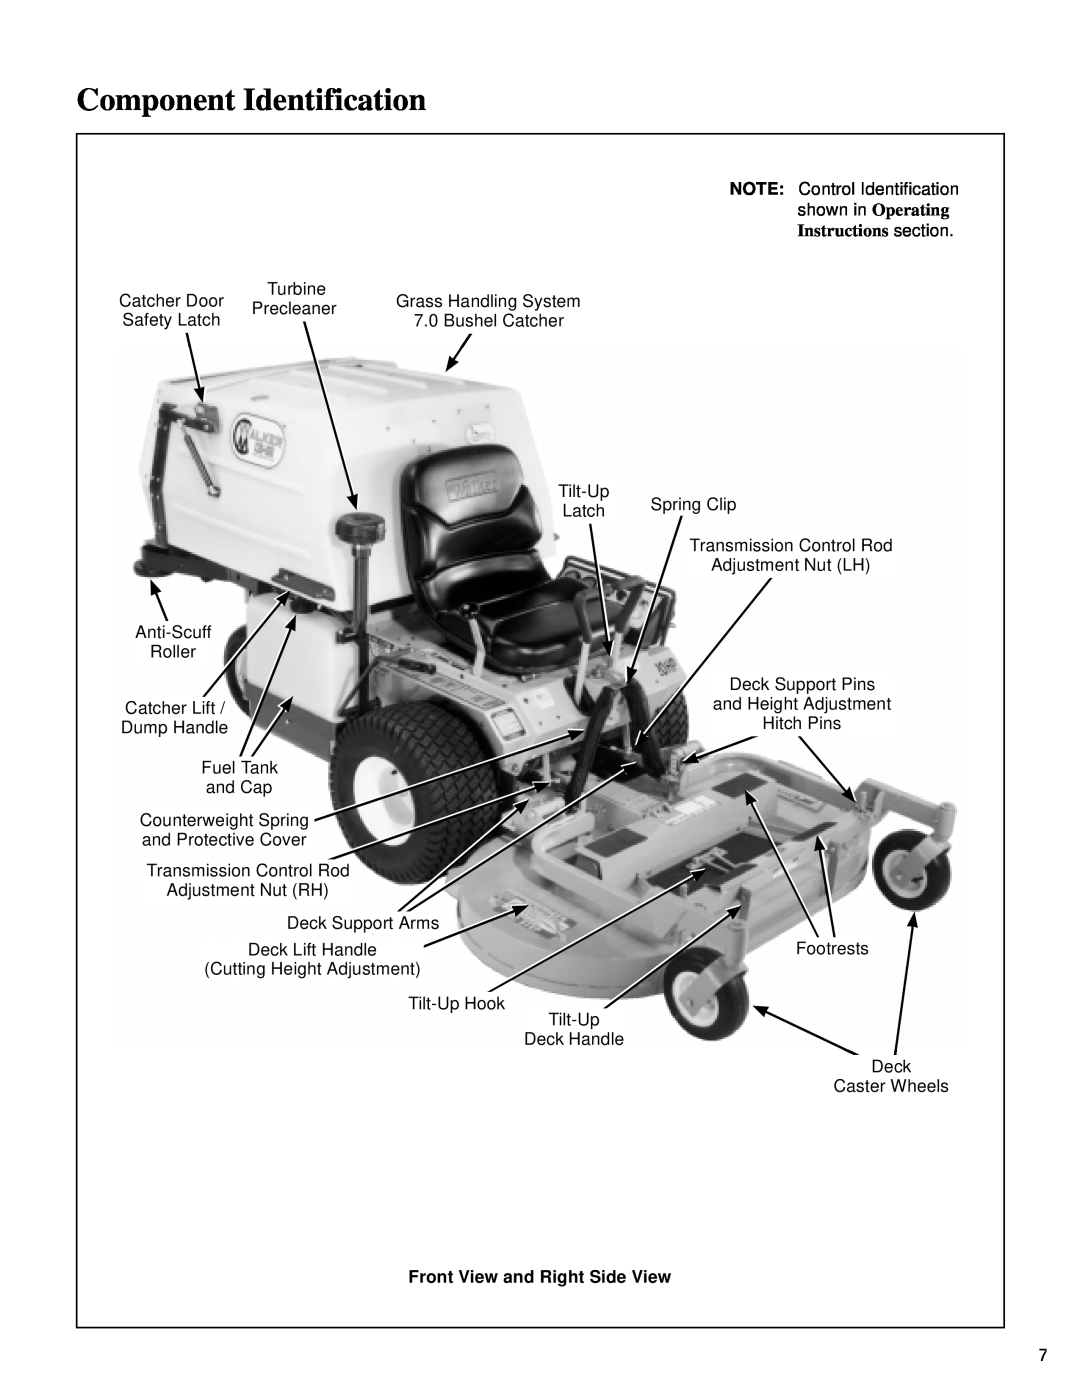 Walker MT owner manual Component Identification, Instructions section, Front View and Right Side View 